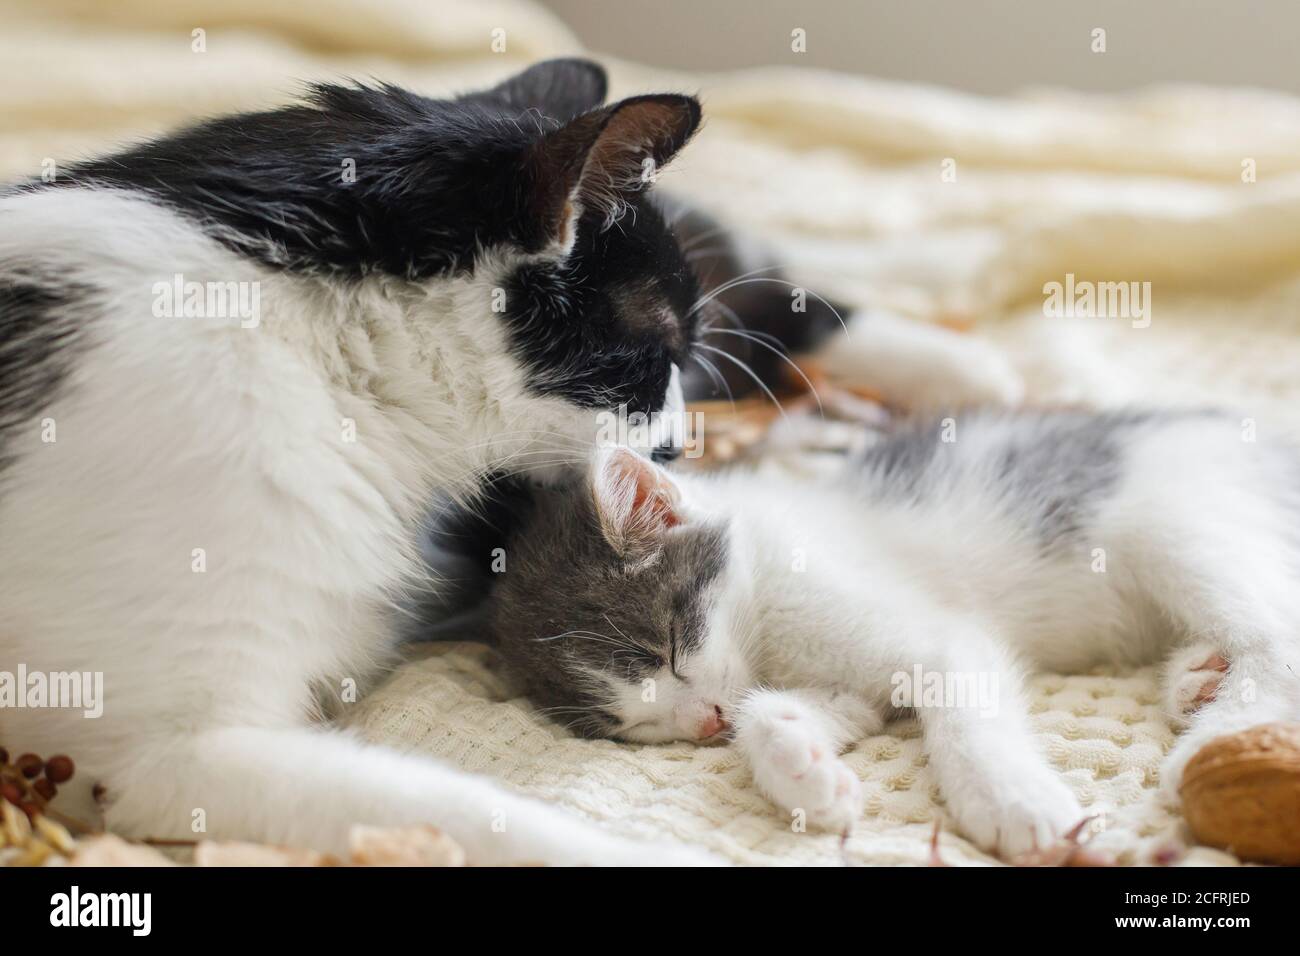 Mother cat cleaning her baby kitty in fall decorations on comfy blanket in room. Motherhood. Autumn cozy mood. Cute cat grooming little kitten on soft Stock Photo